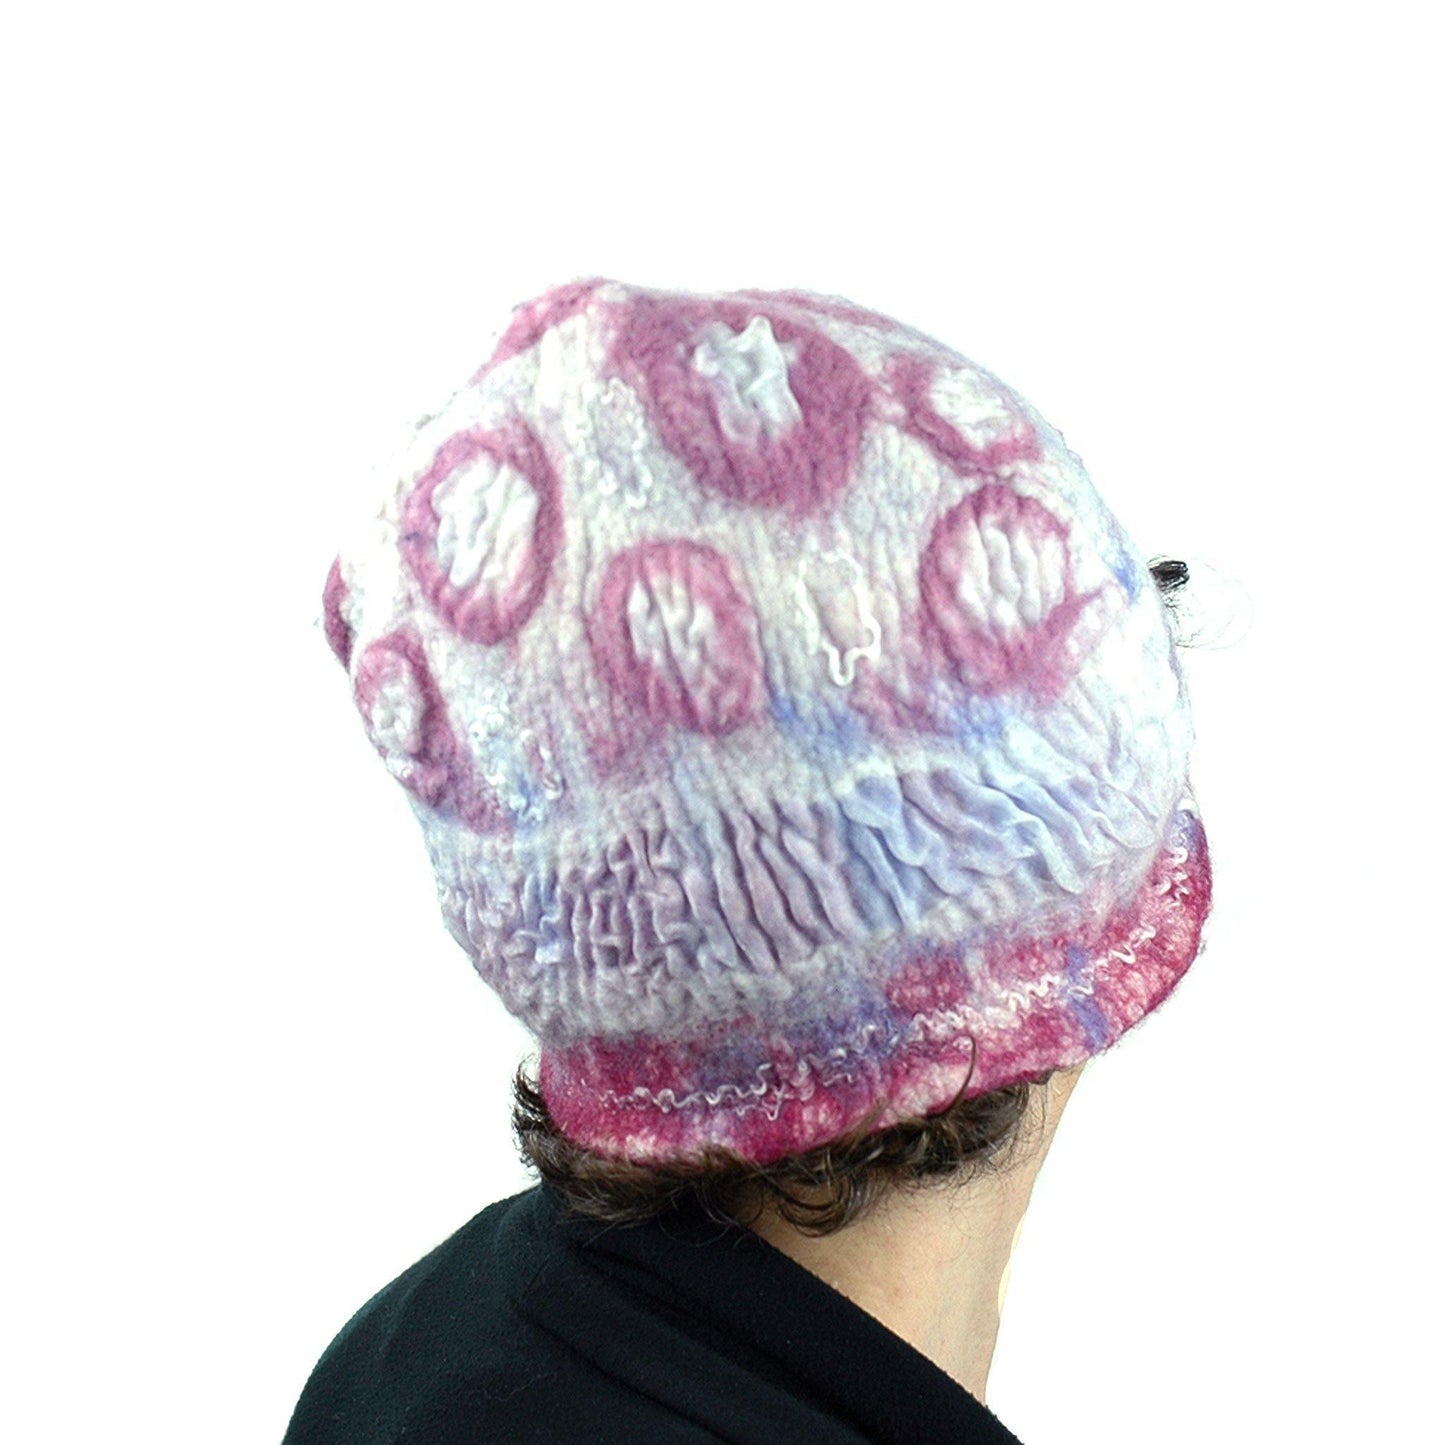 Egg Shaped Pastel Colored Felted Hat - back view